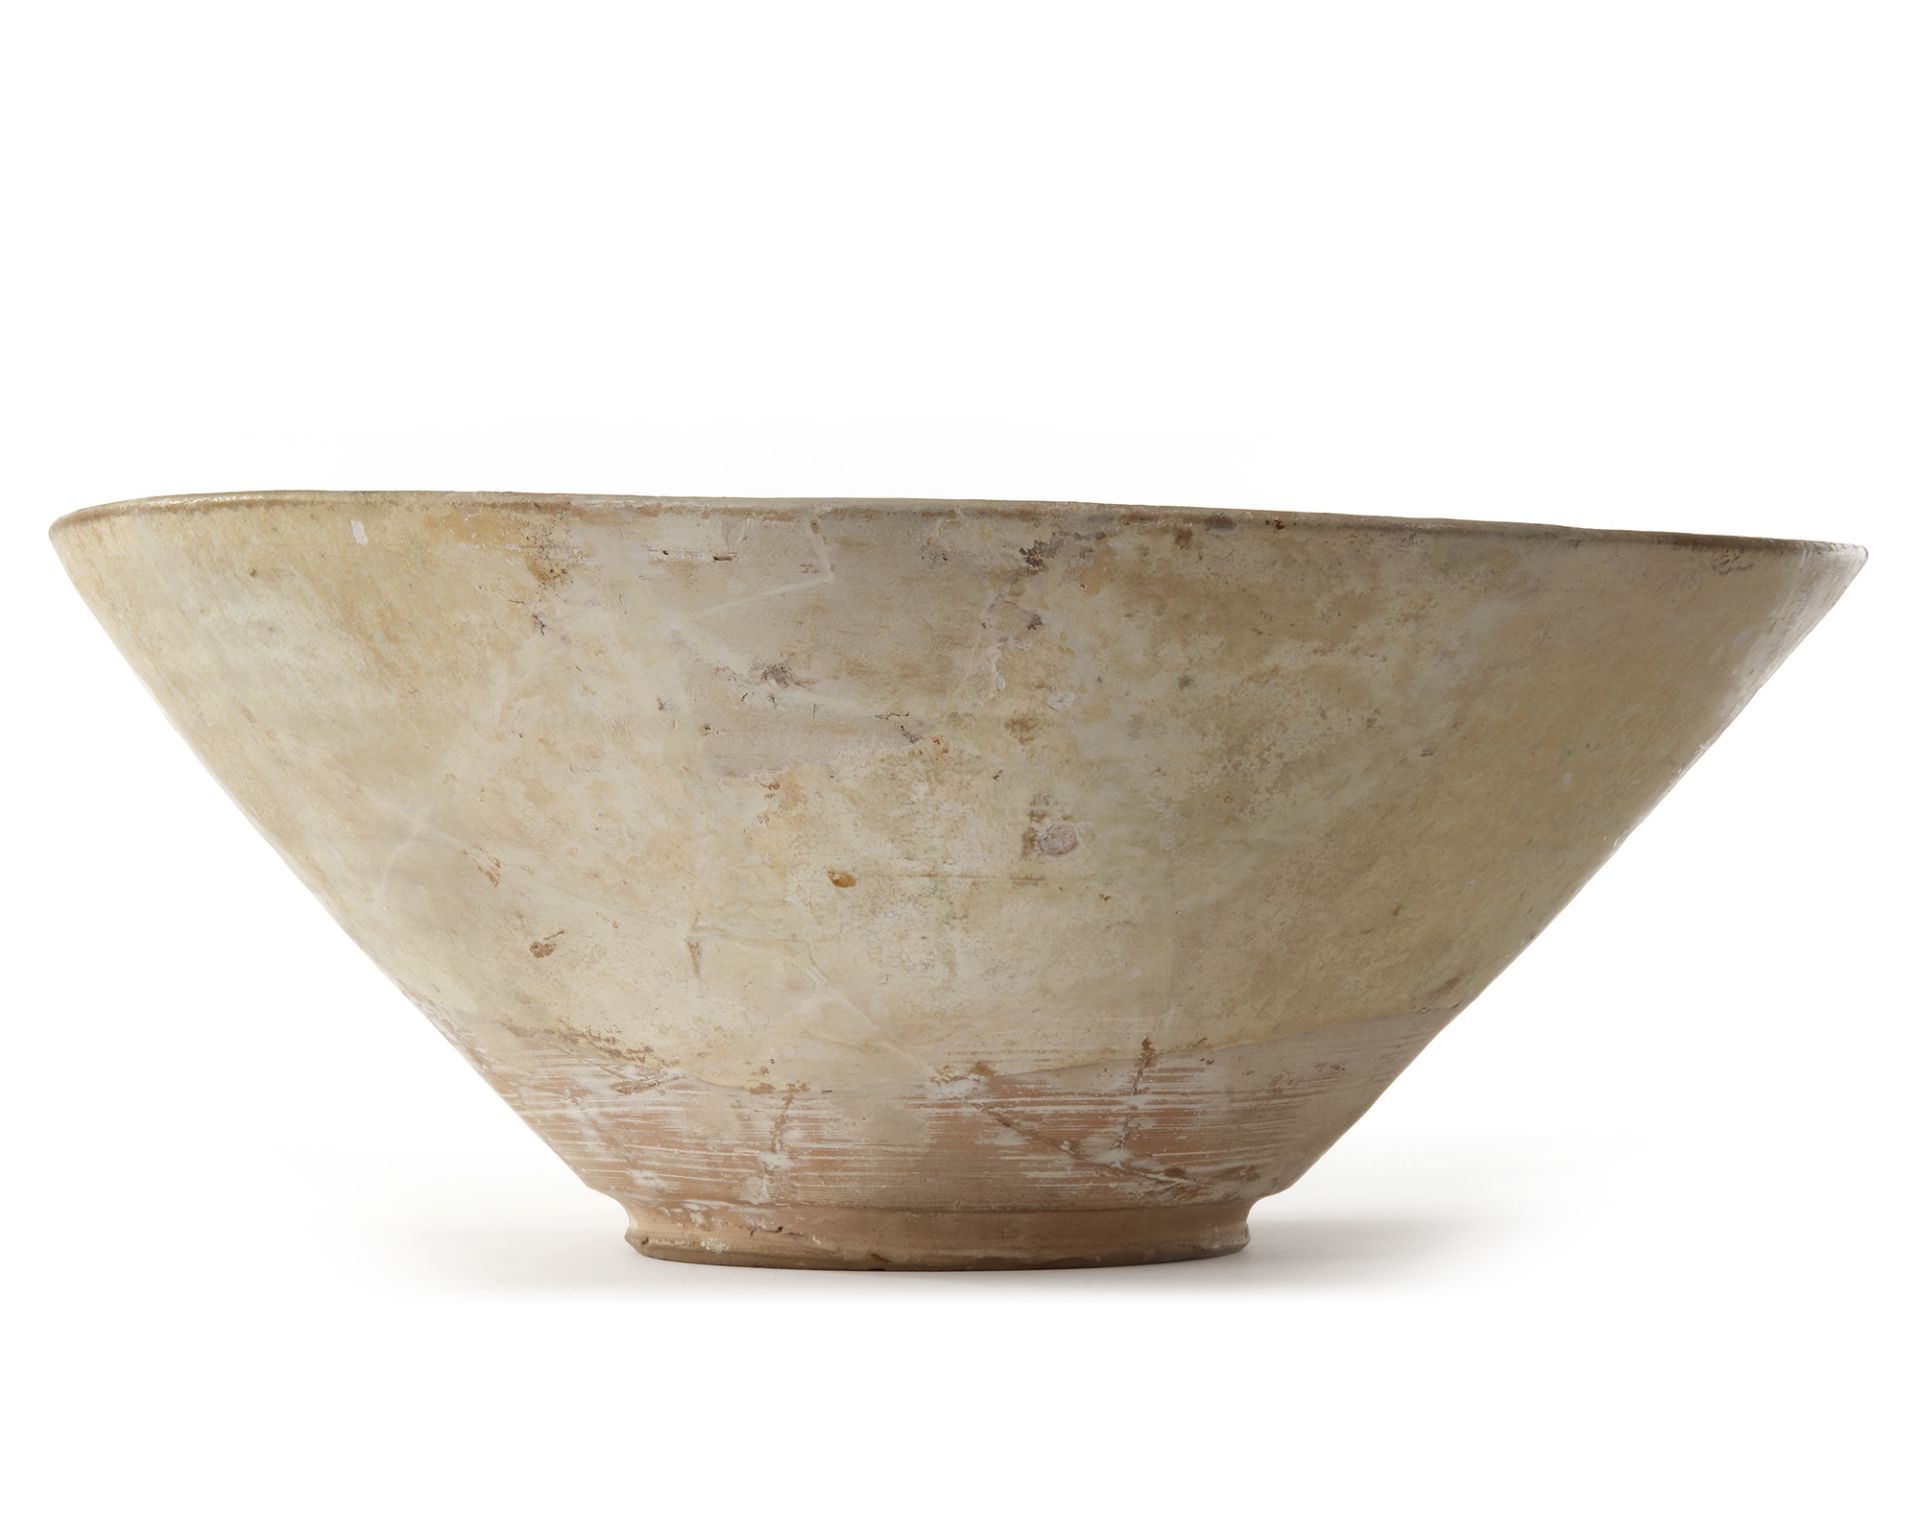 A LARGE POTTERY BOWL, SAMANID, CENTRAL ASIA OR NORTH EAST IRAN, 10TH CENTURY - Image 3 of 4